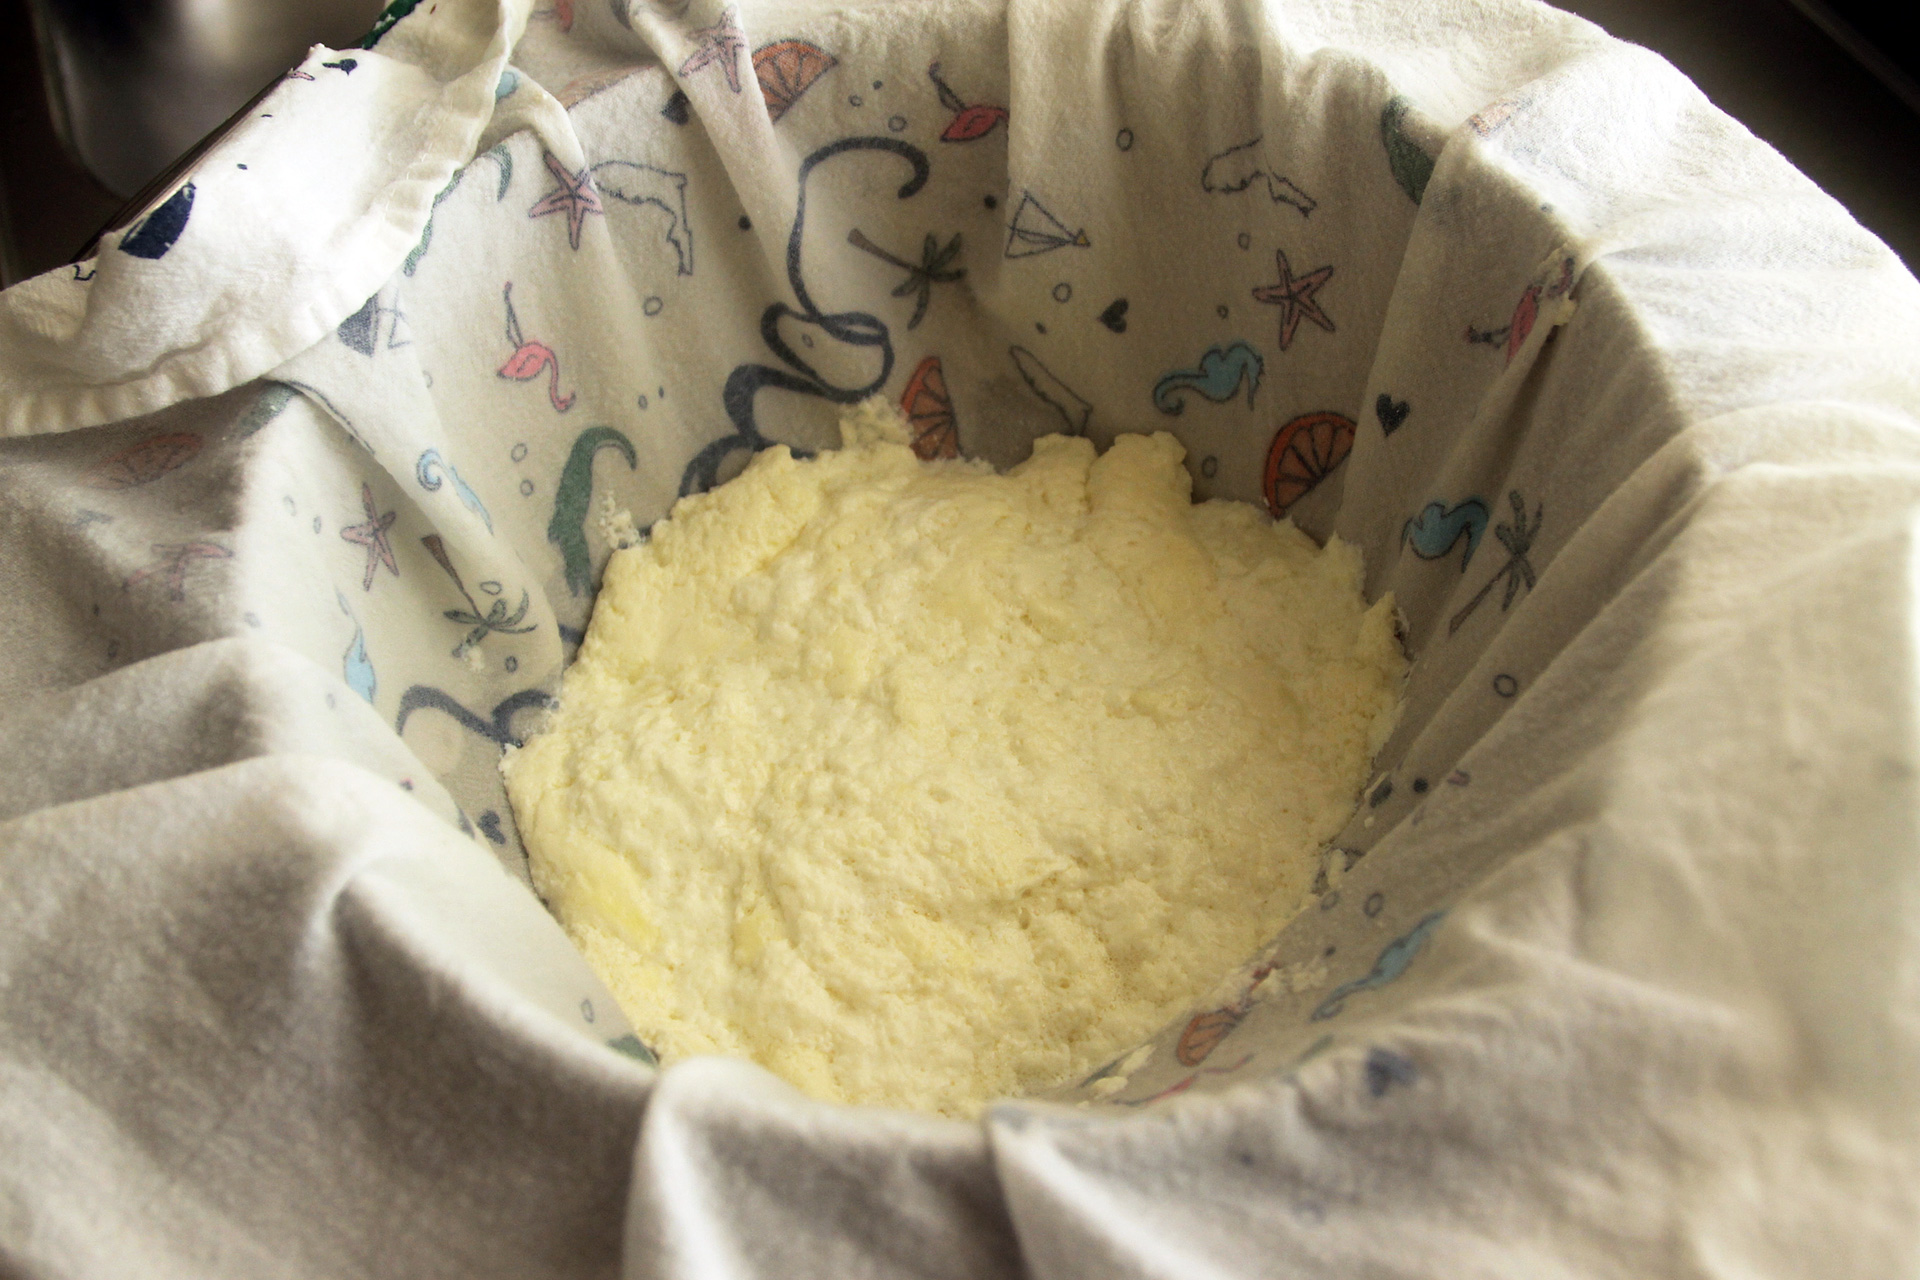 Let the curds drain undisturbed for 10 minutes.